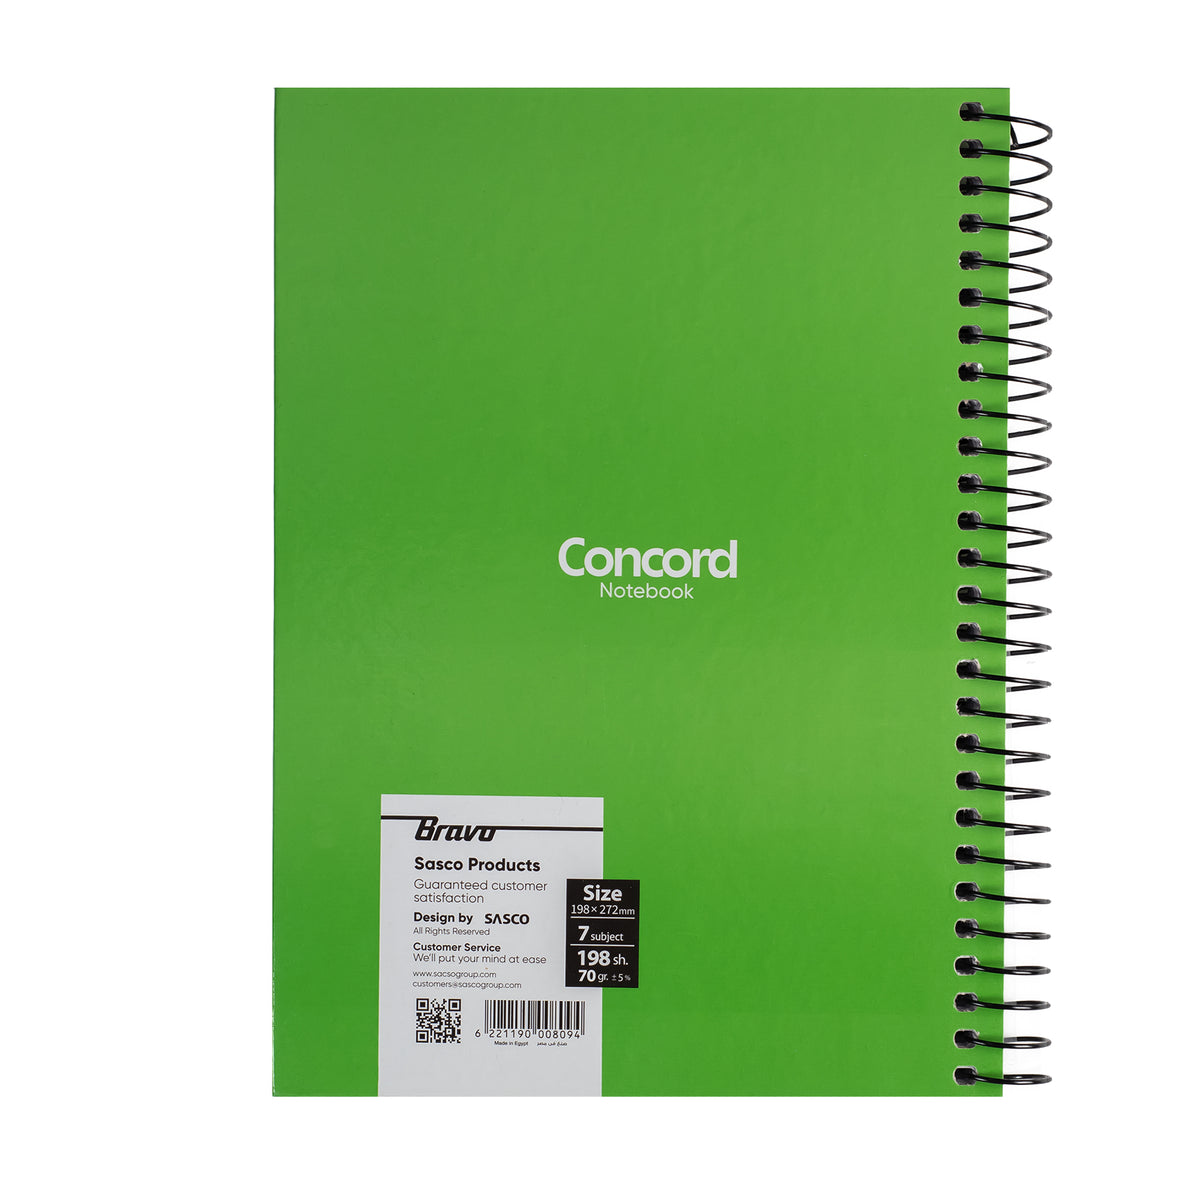 New Concord Notebook  With Pen Large - Green